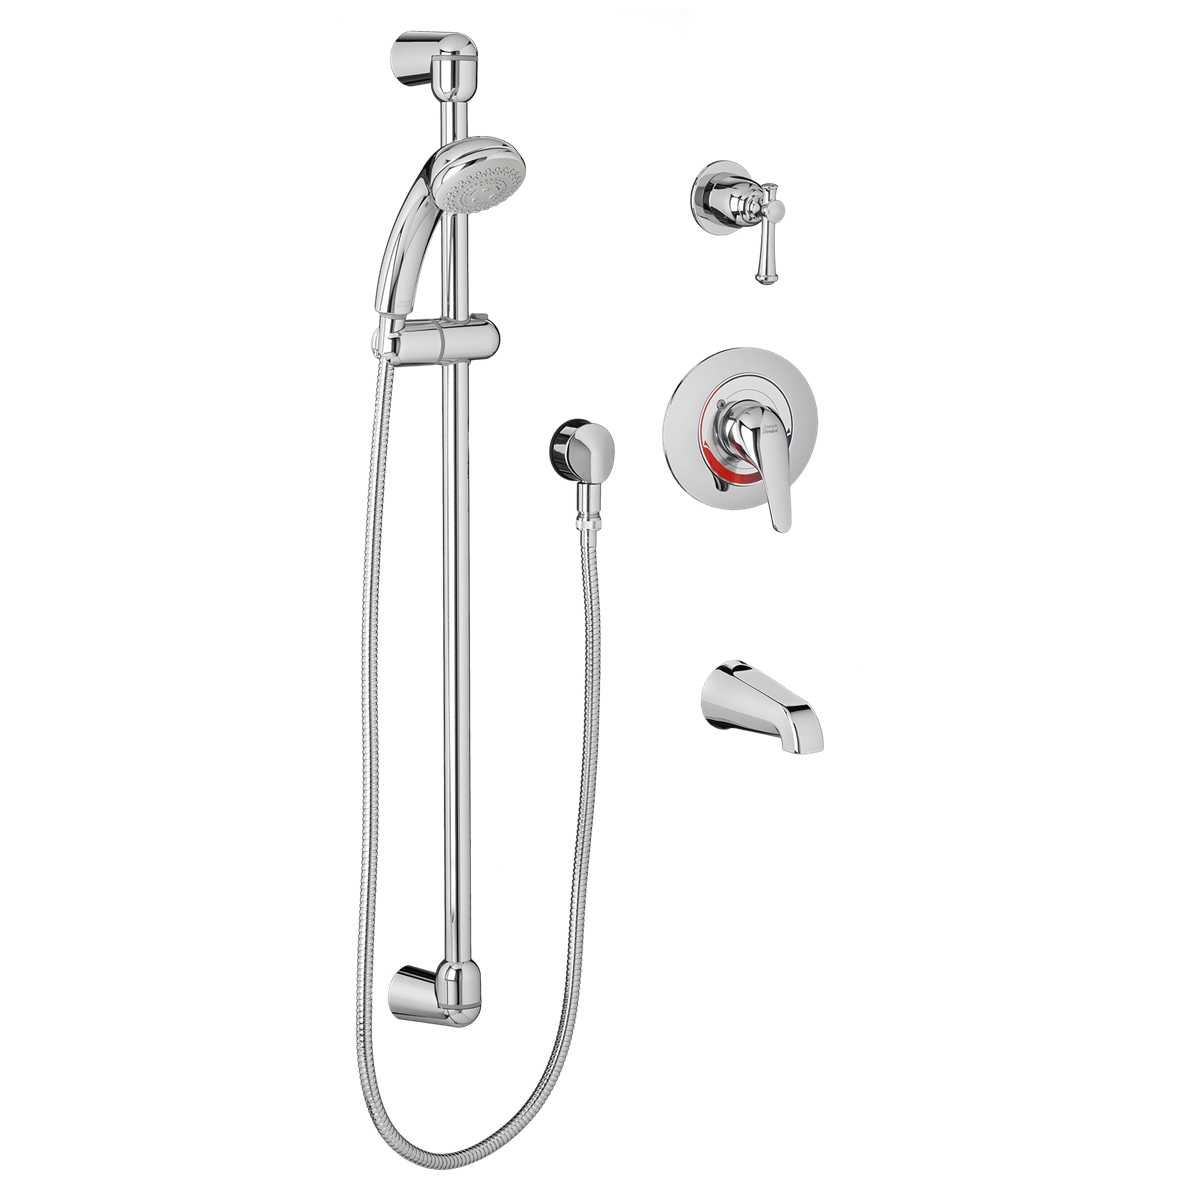 American Standard 1662 212 002 Flowise 1 5 Gpm Shower System Kit With Hand Shower And Tub Spout 1662 212 002 1662212002